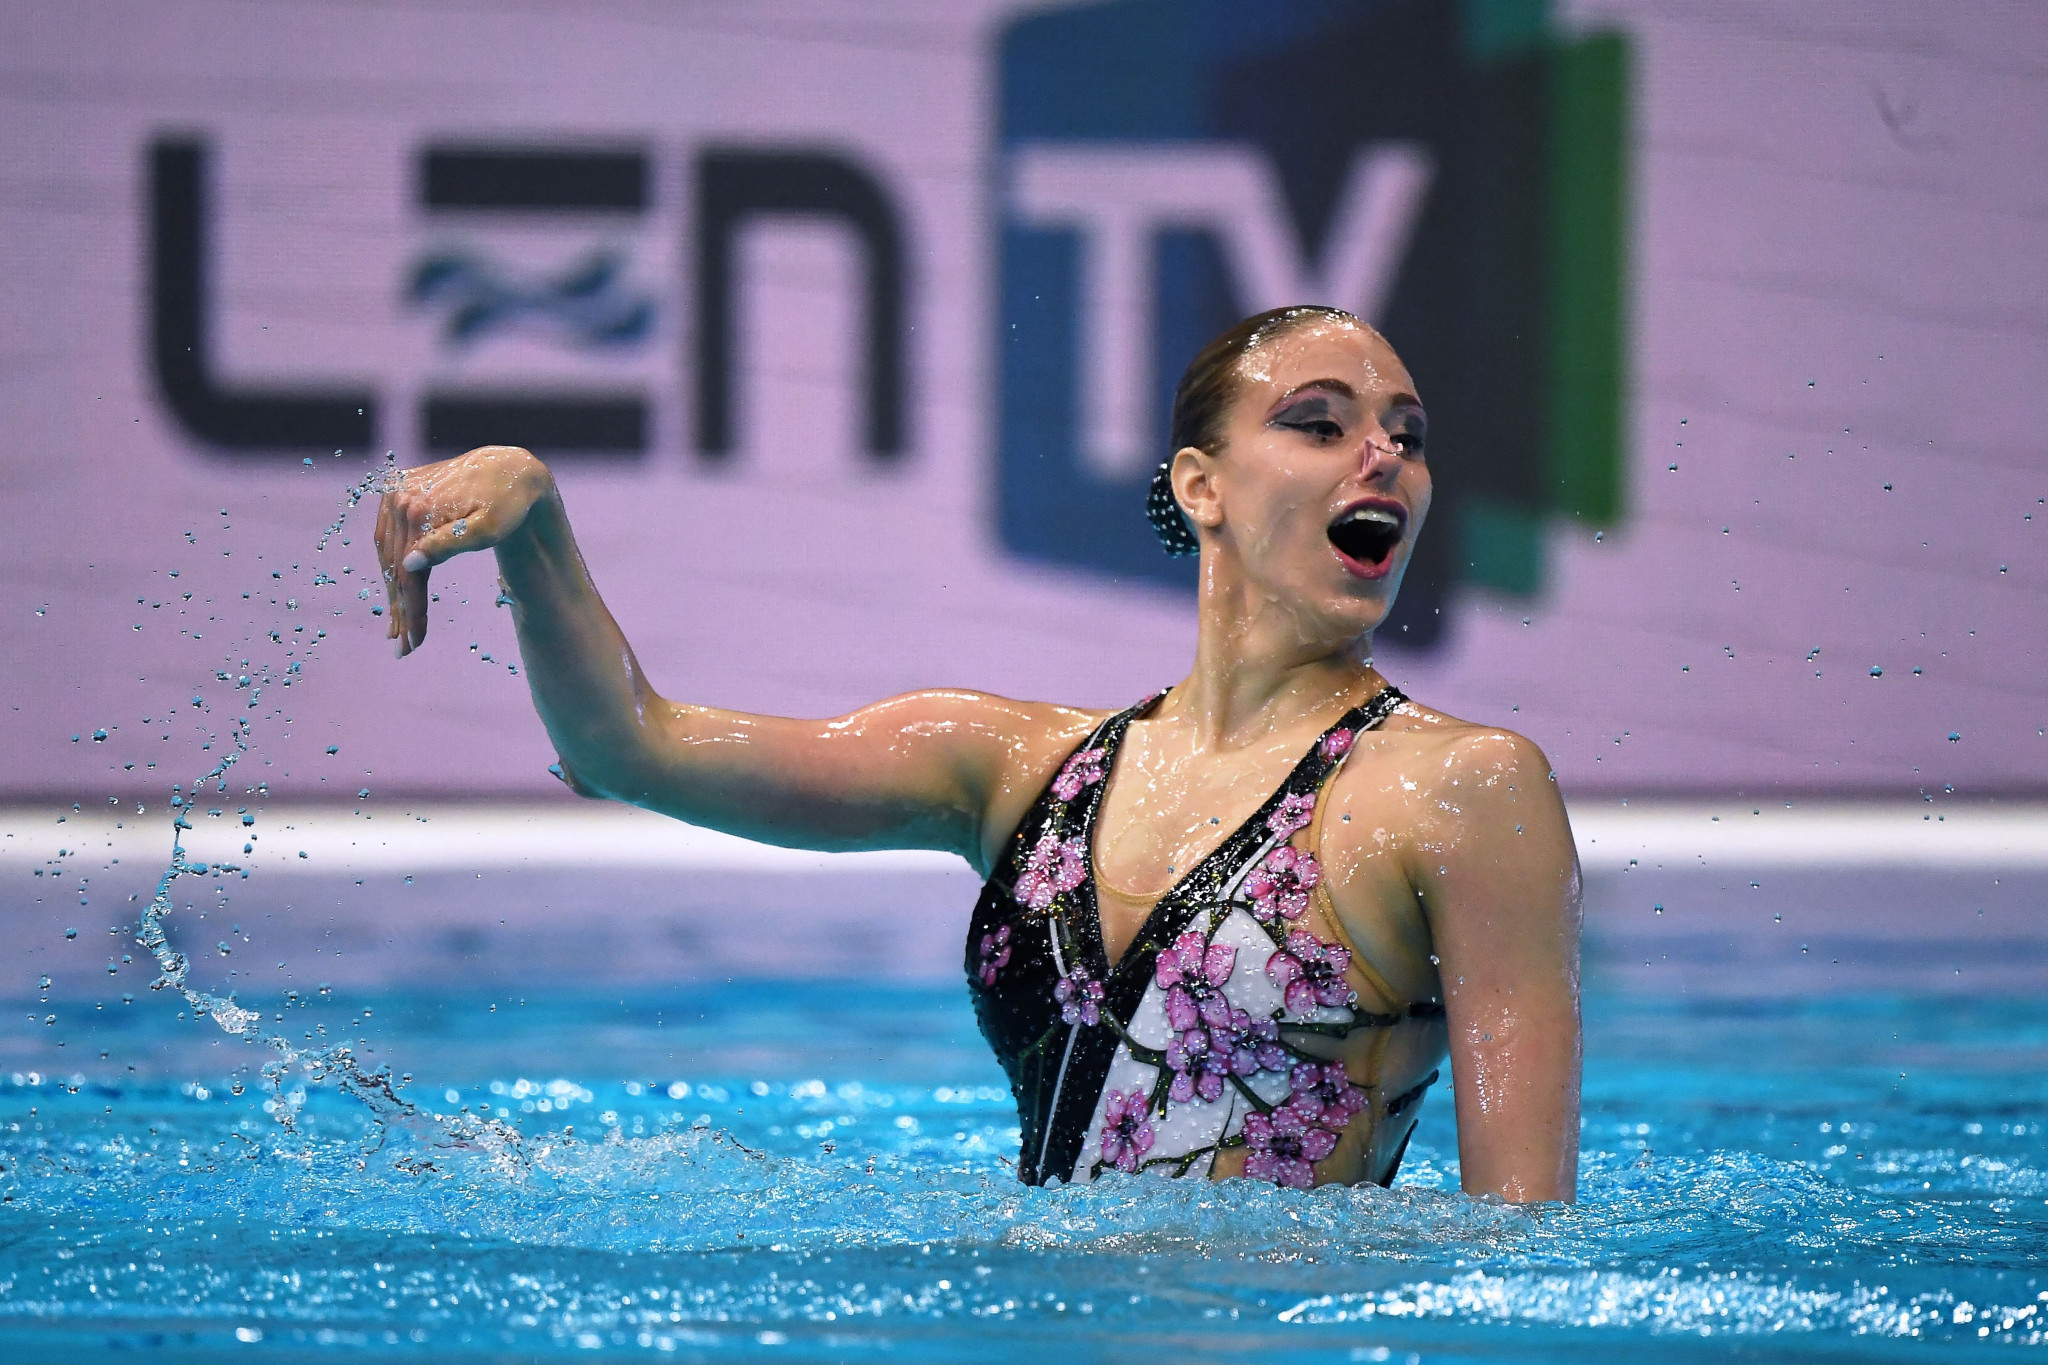 "Neutral" Russian athletes dominate day one of FINA Artistic Swimming World Series organised by US and Canada